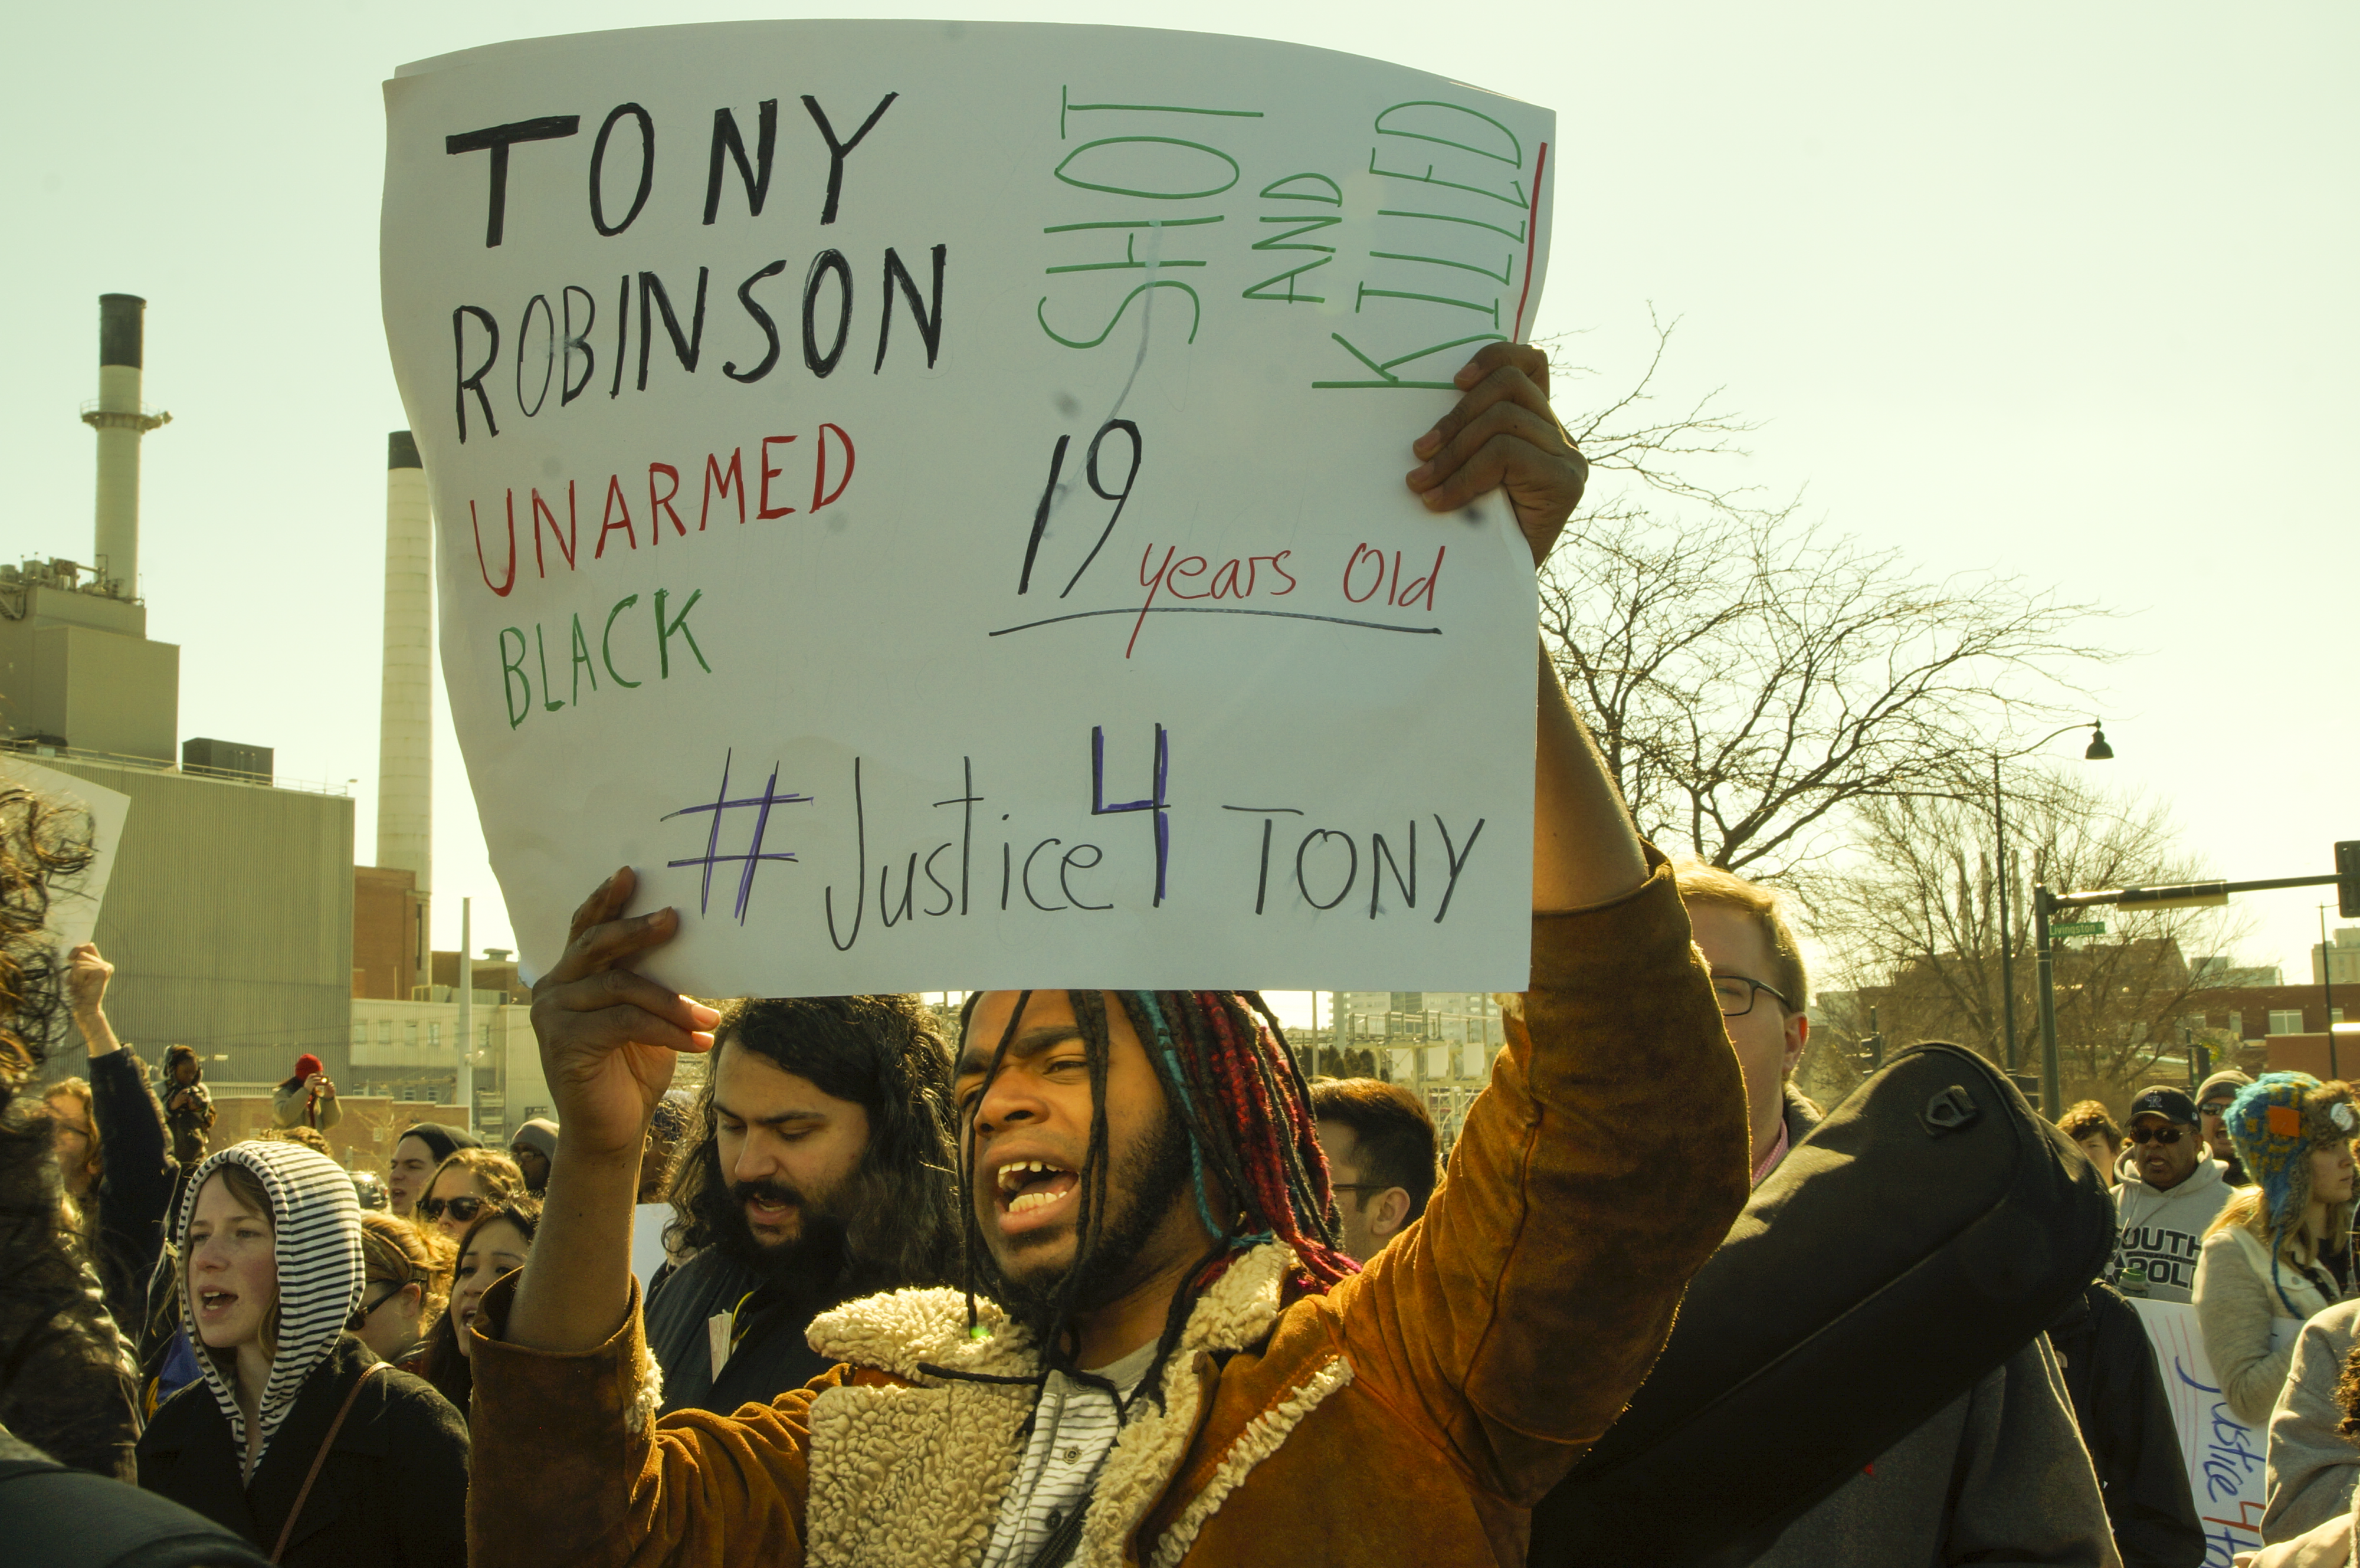 A man demonstrates on March 7, 2015 following the shooting death of Tony Robinson by Madison police.